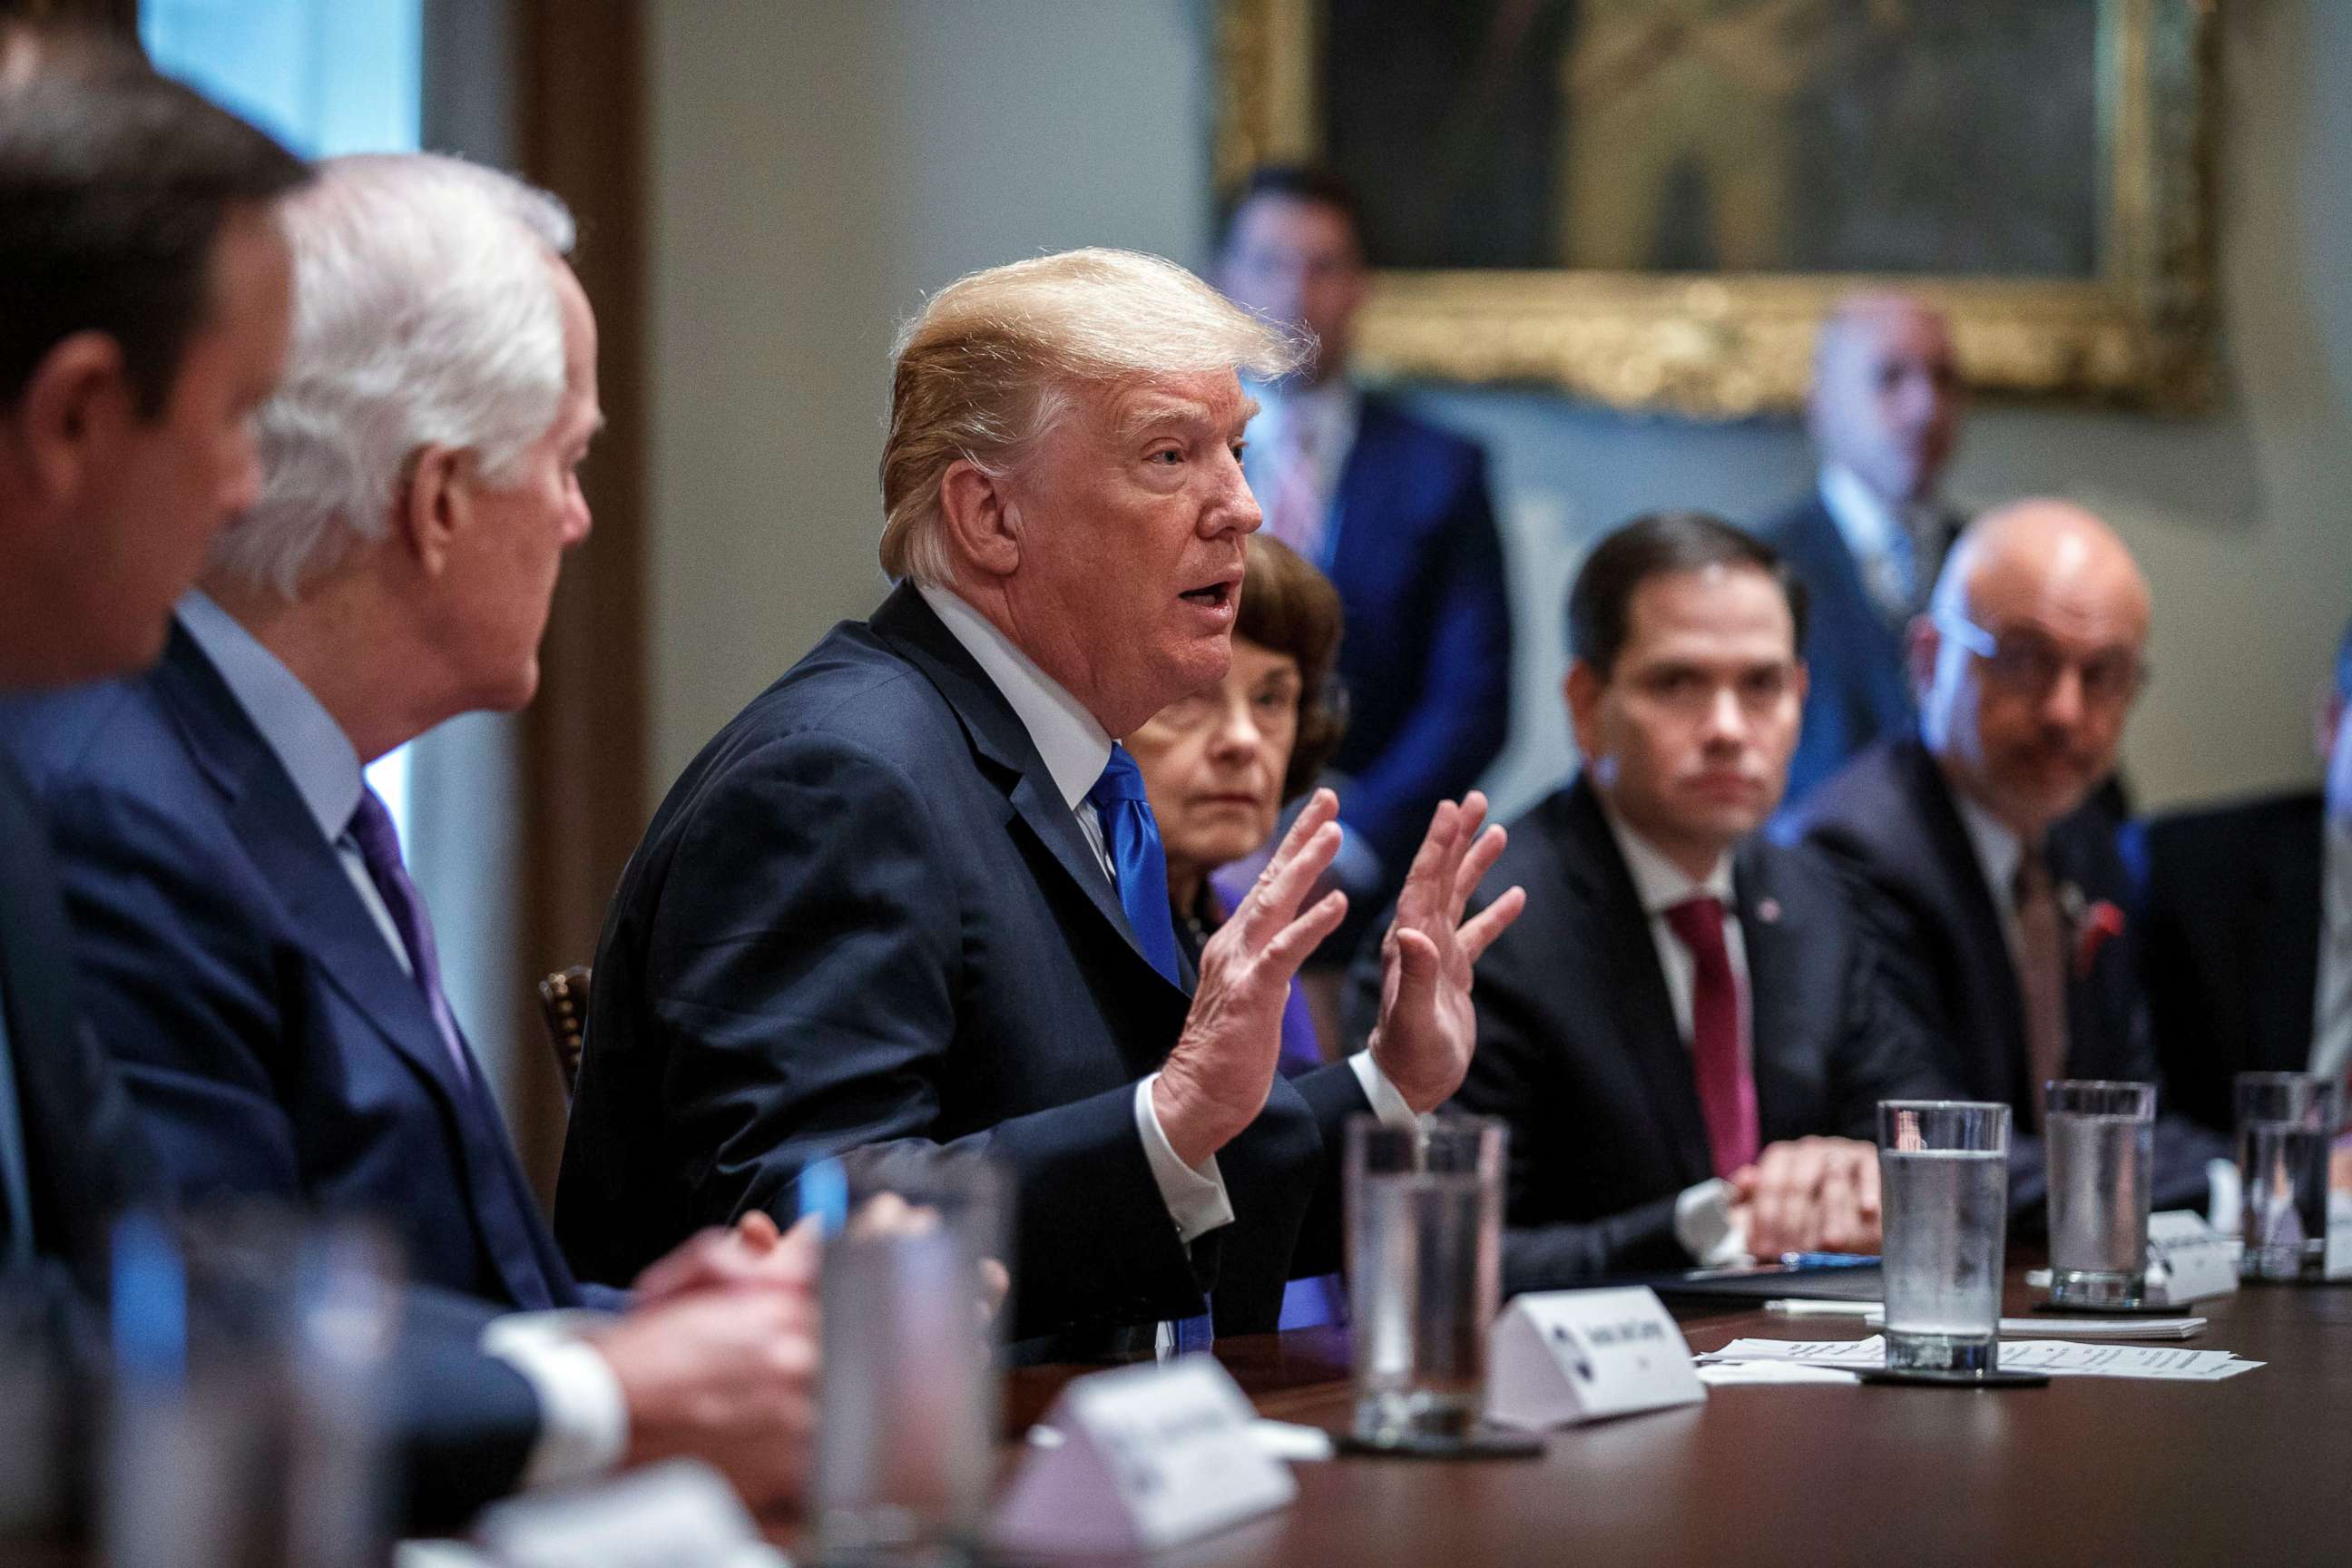 PHOTO: President Donald Trump delivers remarks during a meeting with bipartisan Members of Congress to discuss school and community safety, at the White House in Washington, D.C., Feb. 28, 2018.